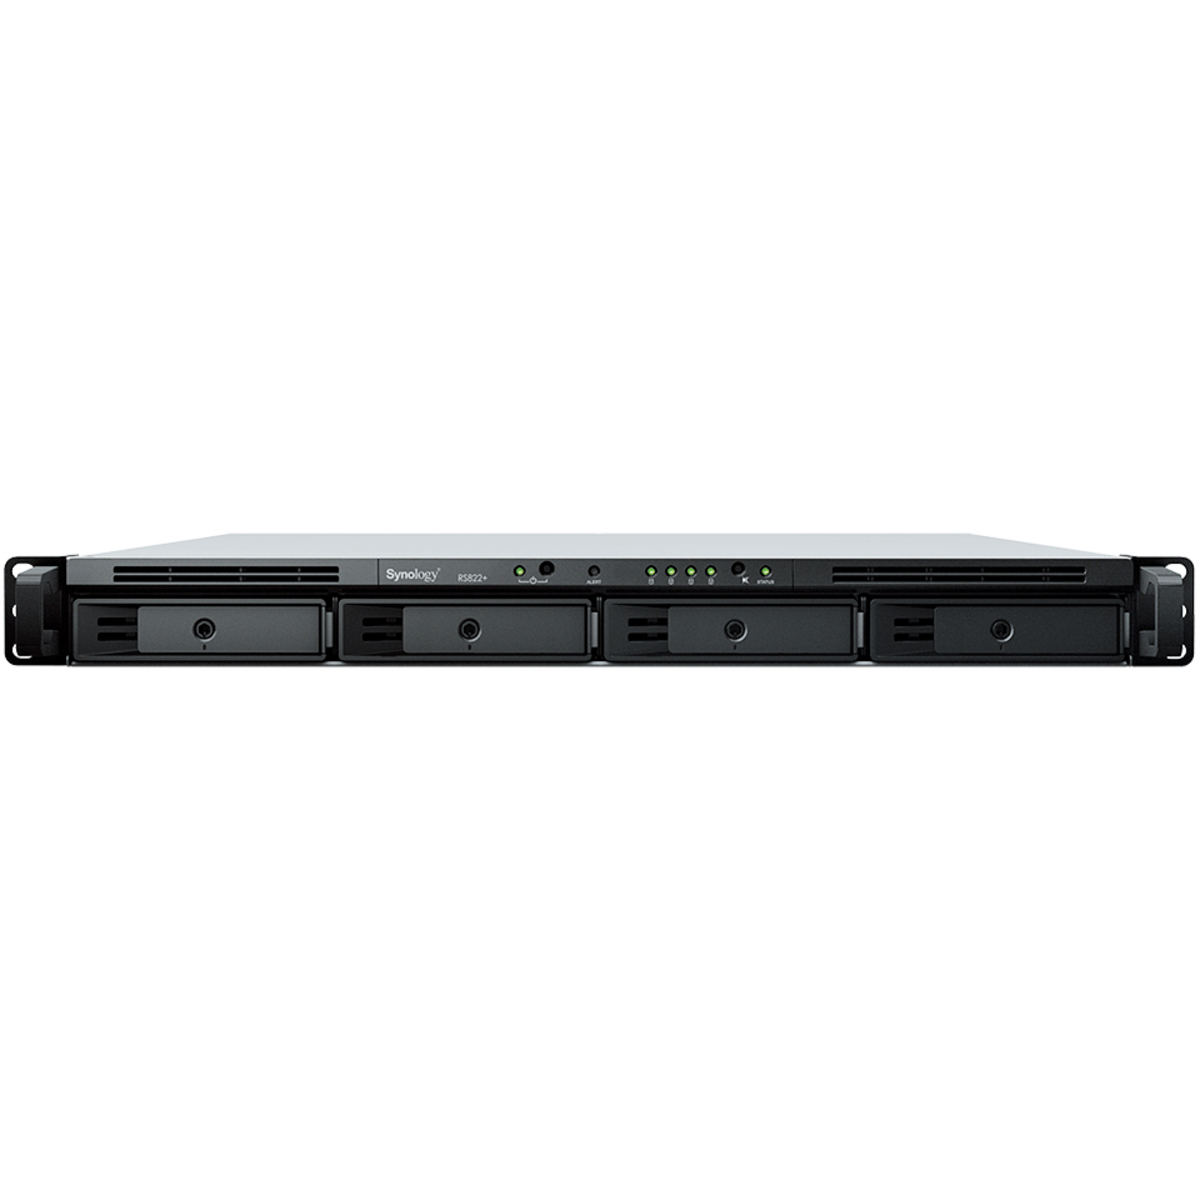 Synology RackStation RS822+ 32tb 4-Bay RackMount Multimedia / Power User / Business NAS - Network Attached Storage Device 2x16tb Seagate IronWolf ST16000VN001 3.5 7200rpm SATA 6Gb/s HDD NAS Class Drives Installed - Burn-In Tested RackStation RS822+